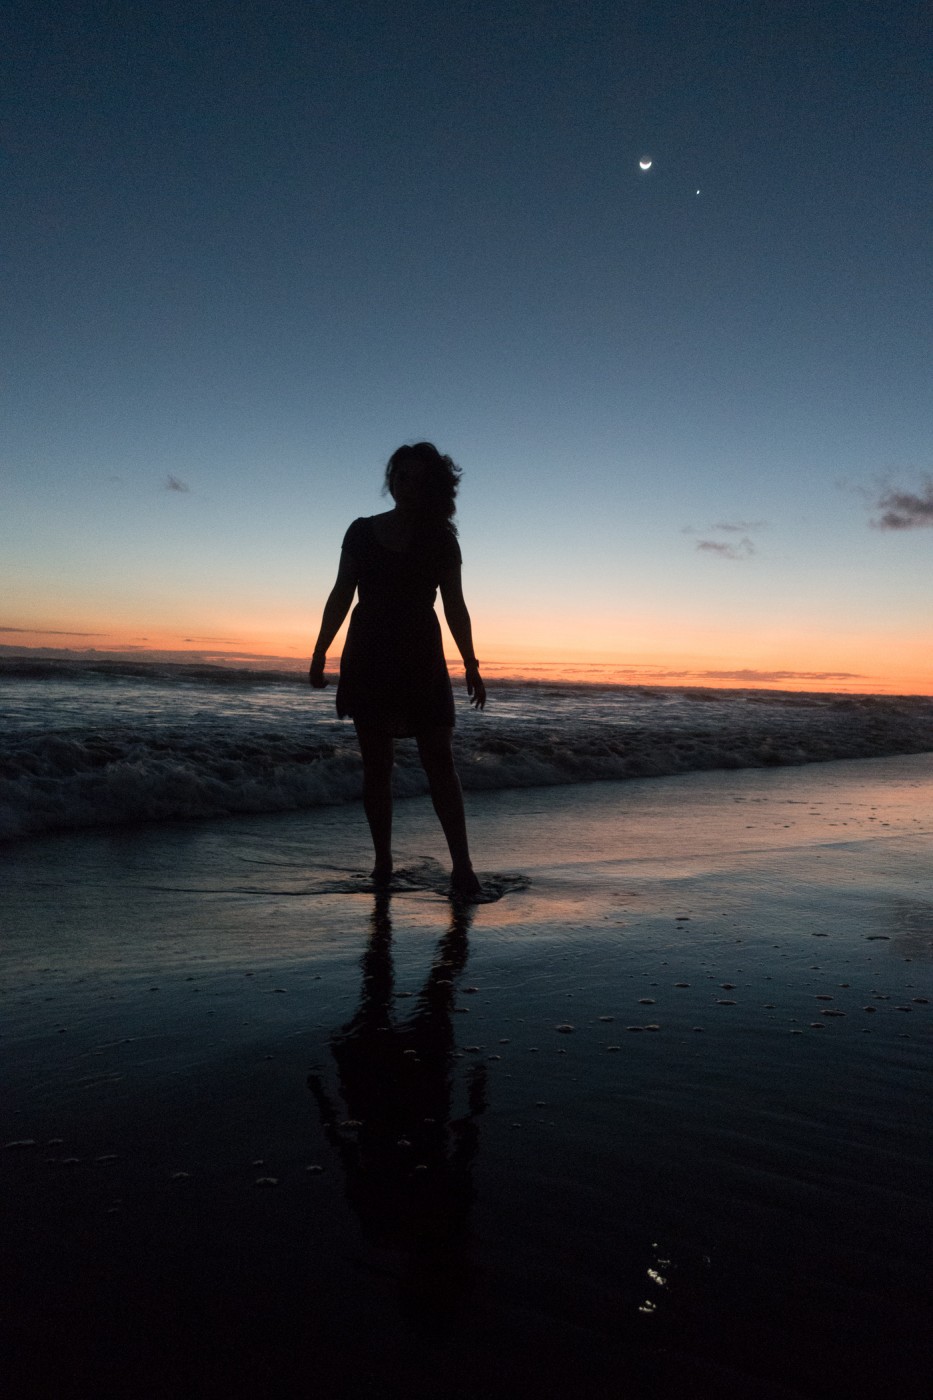 Sony RX-100 III photography sample: woman's silhouette on beach at sunset